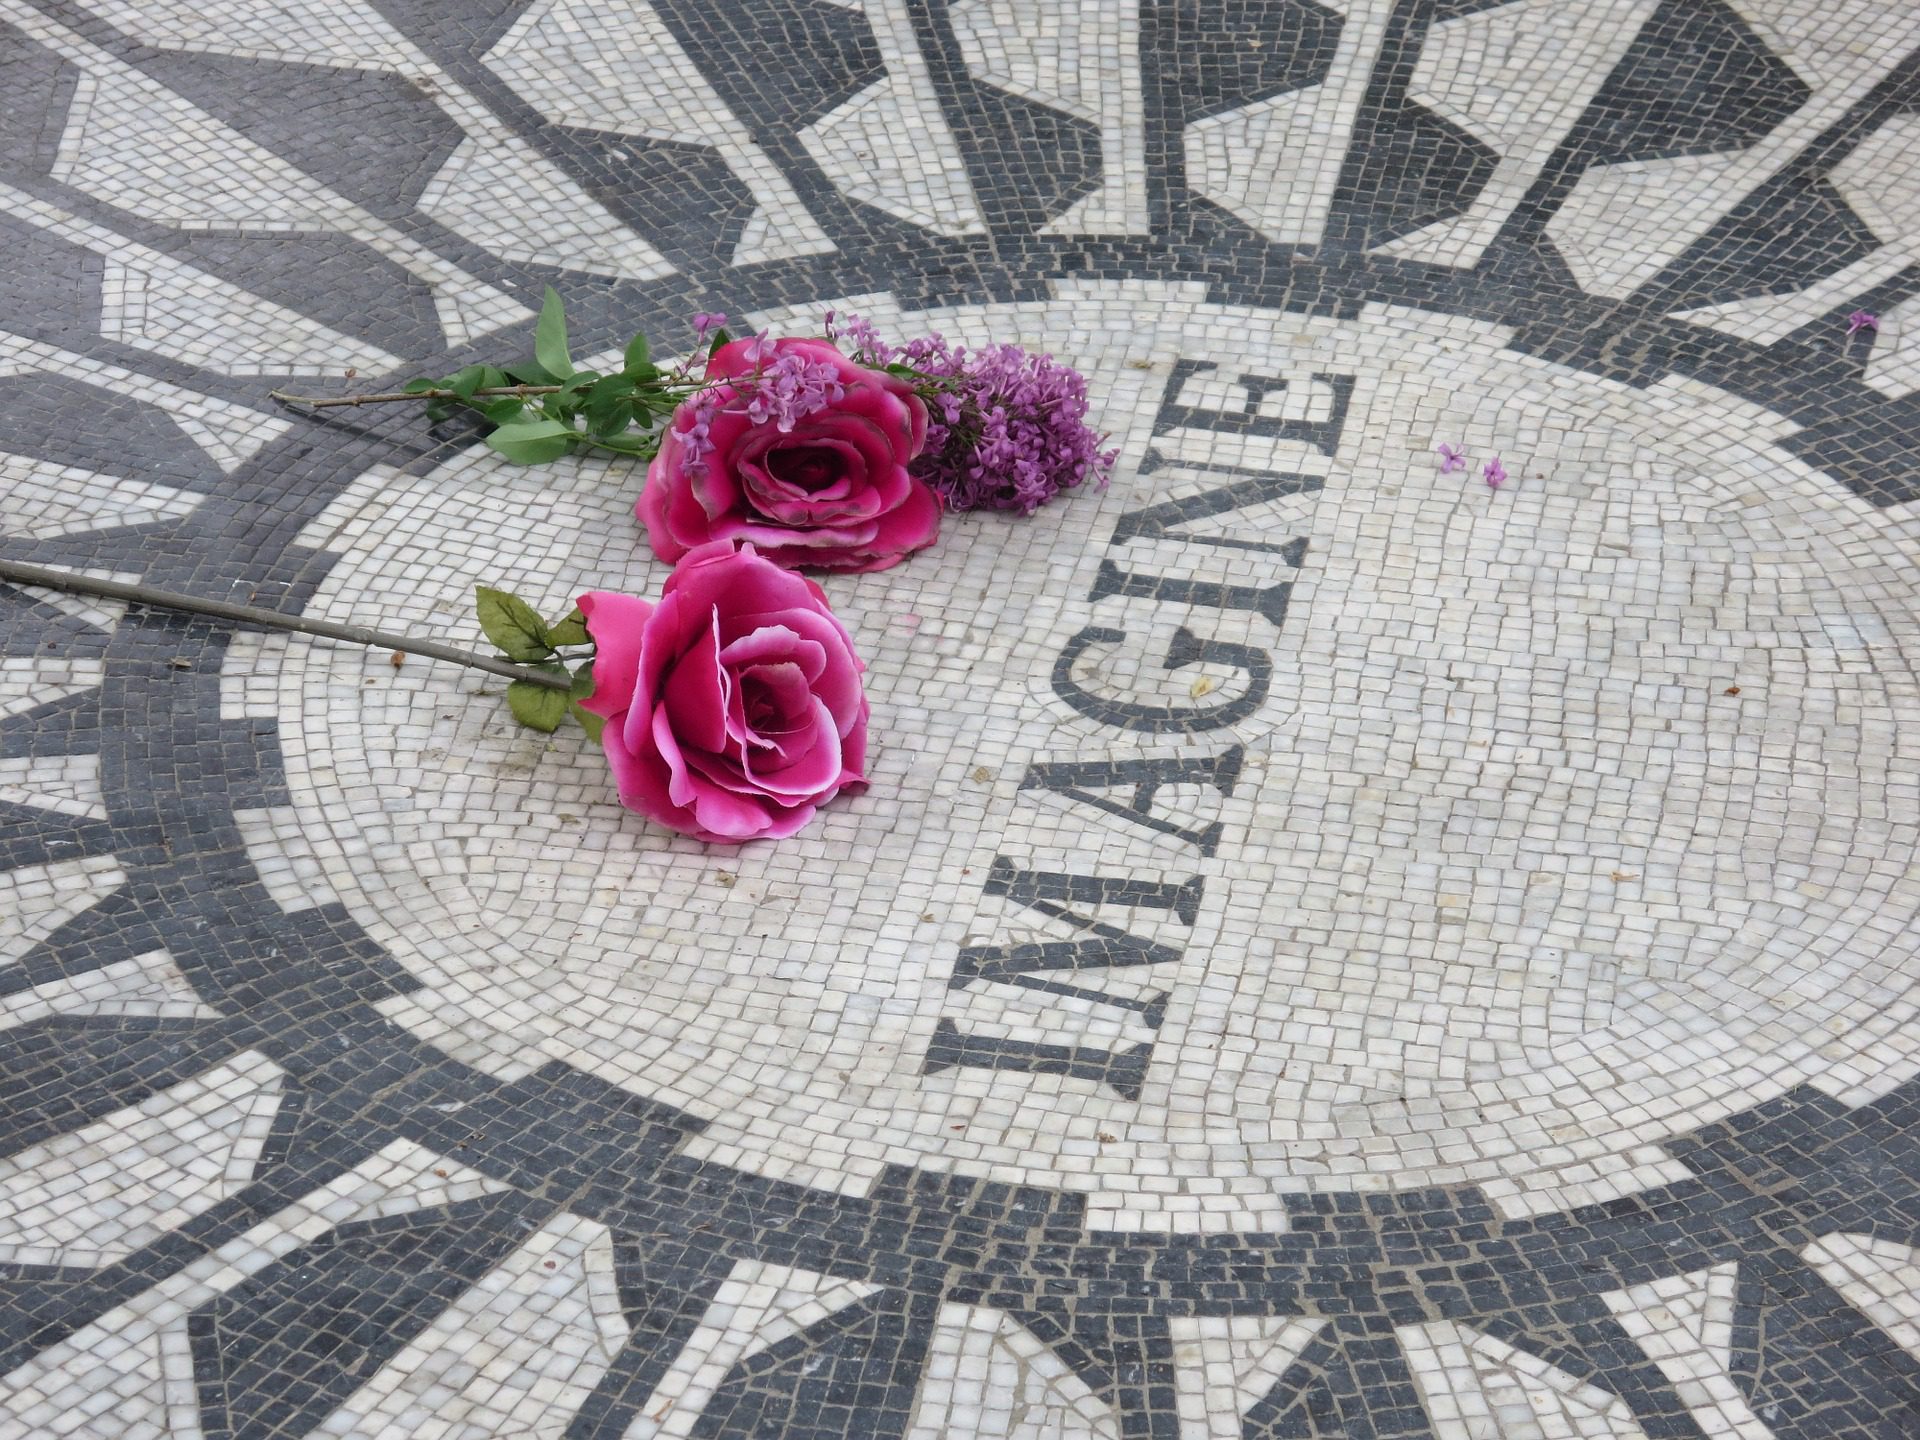 Imagine Mosaic, Strawberry Fields, Central Park, NYC